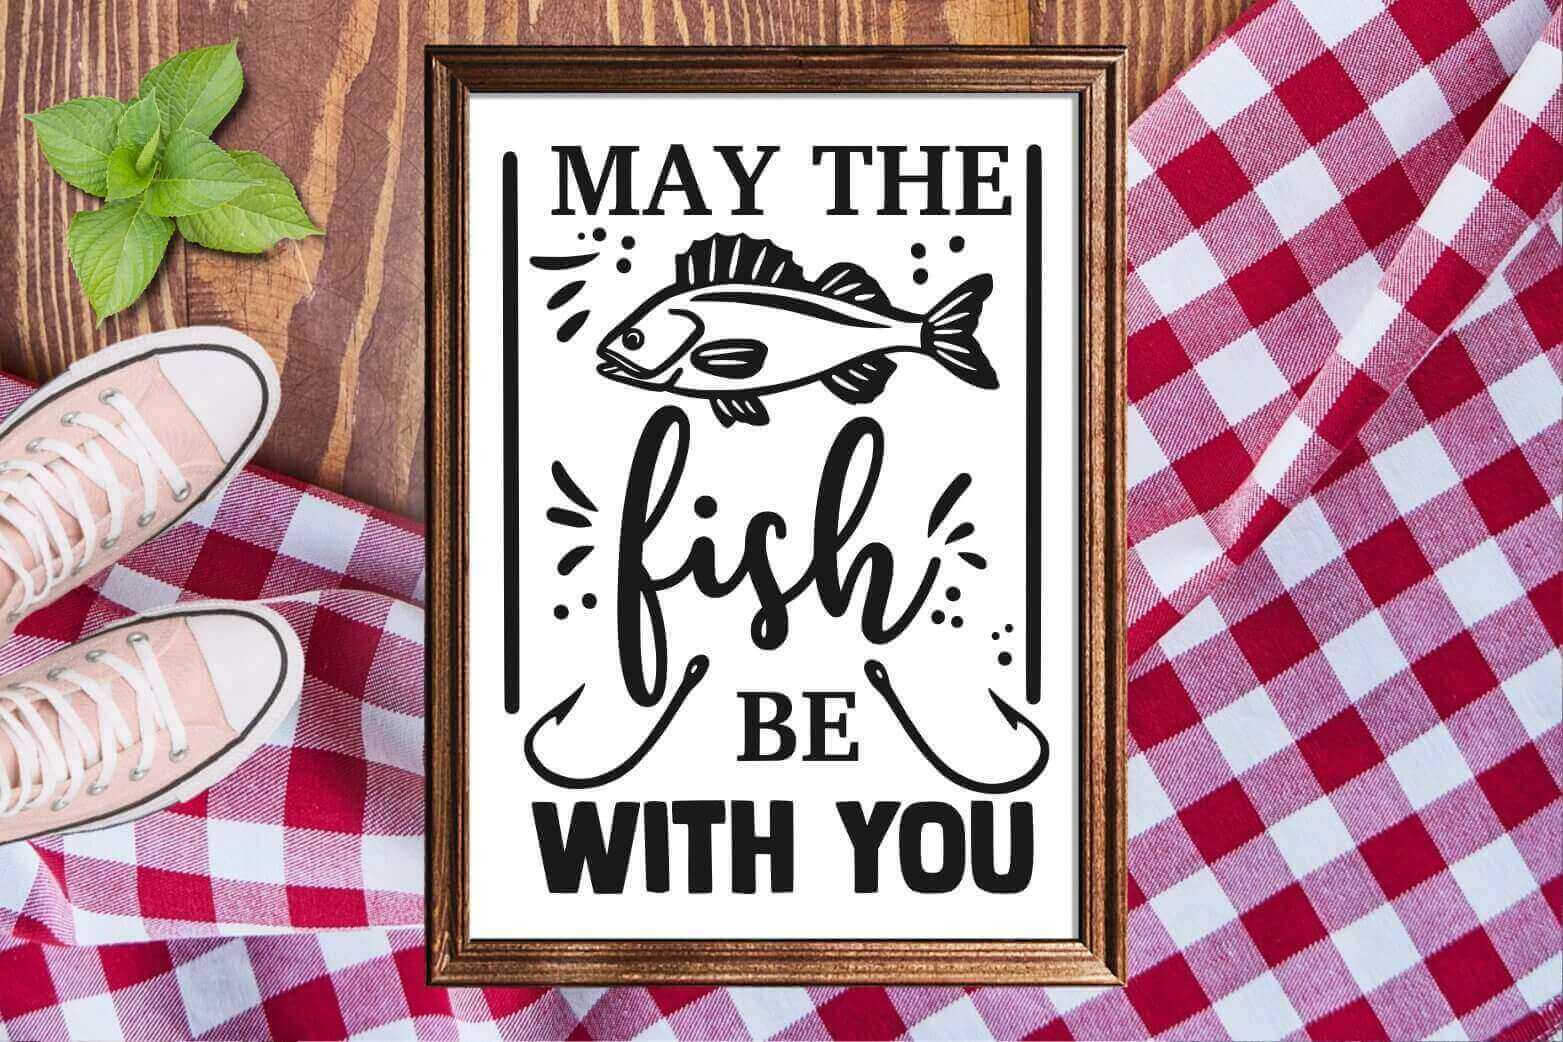 May the Fish be with You.